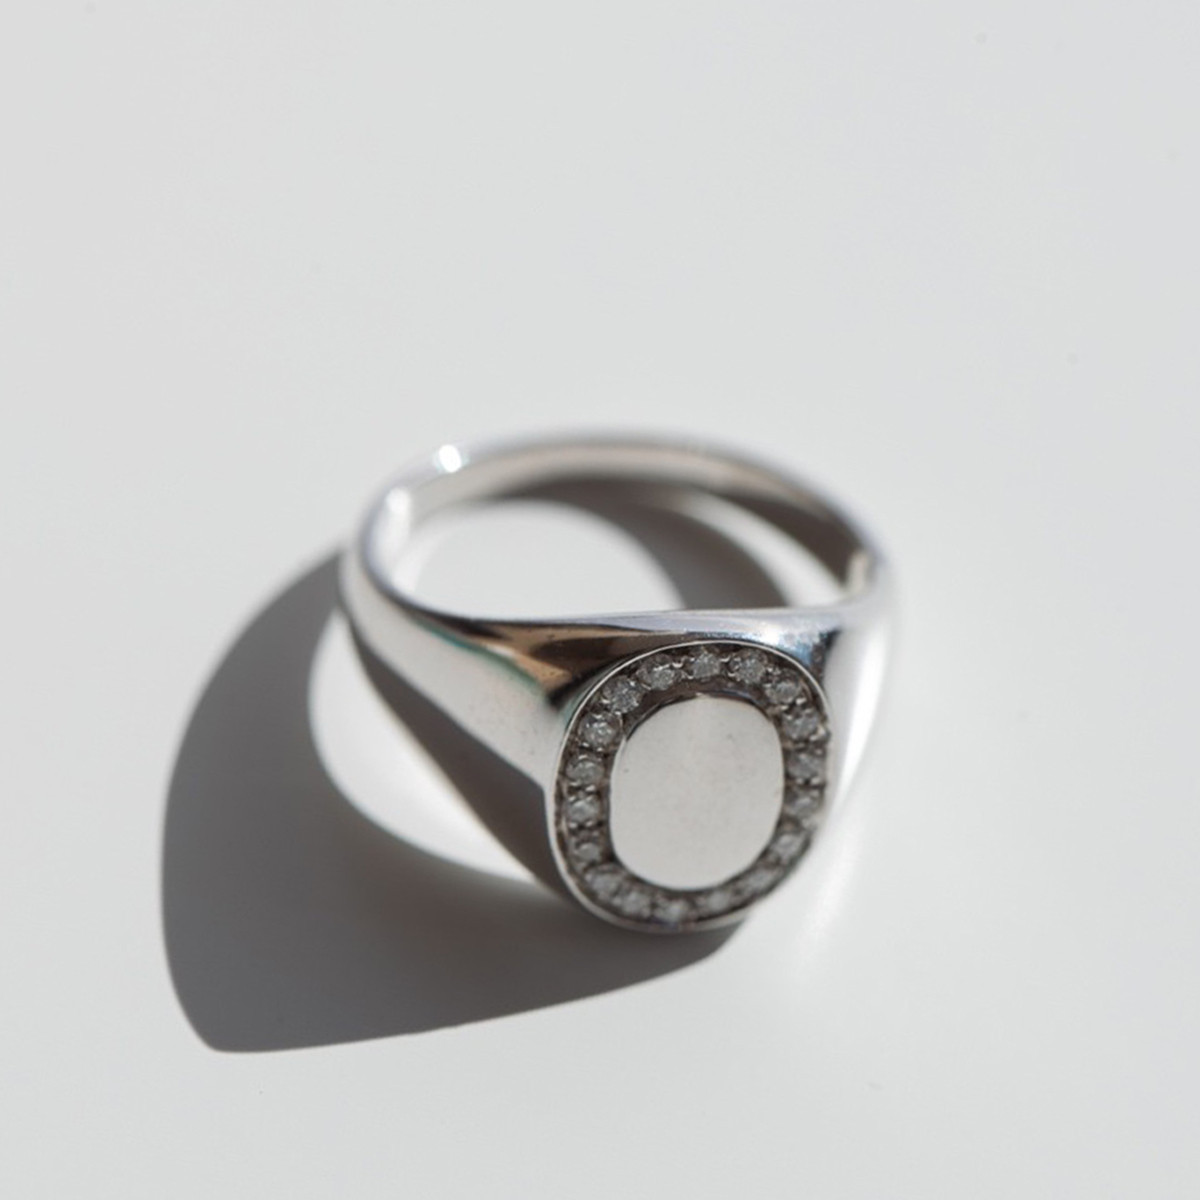 SILVER OVAL SIGNET RING